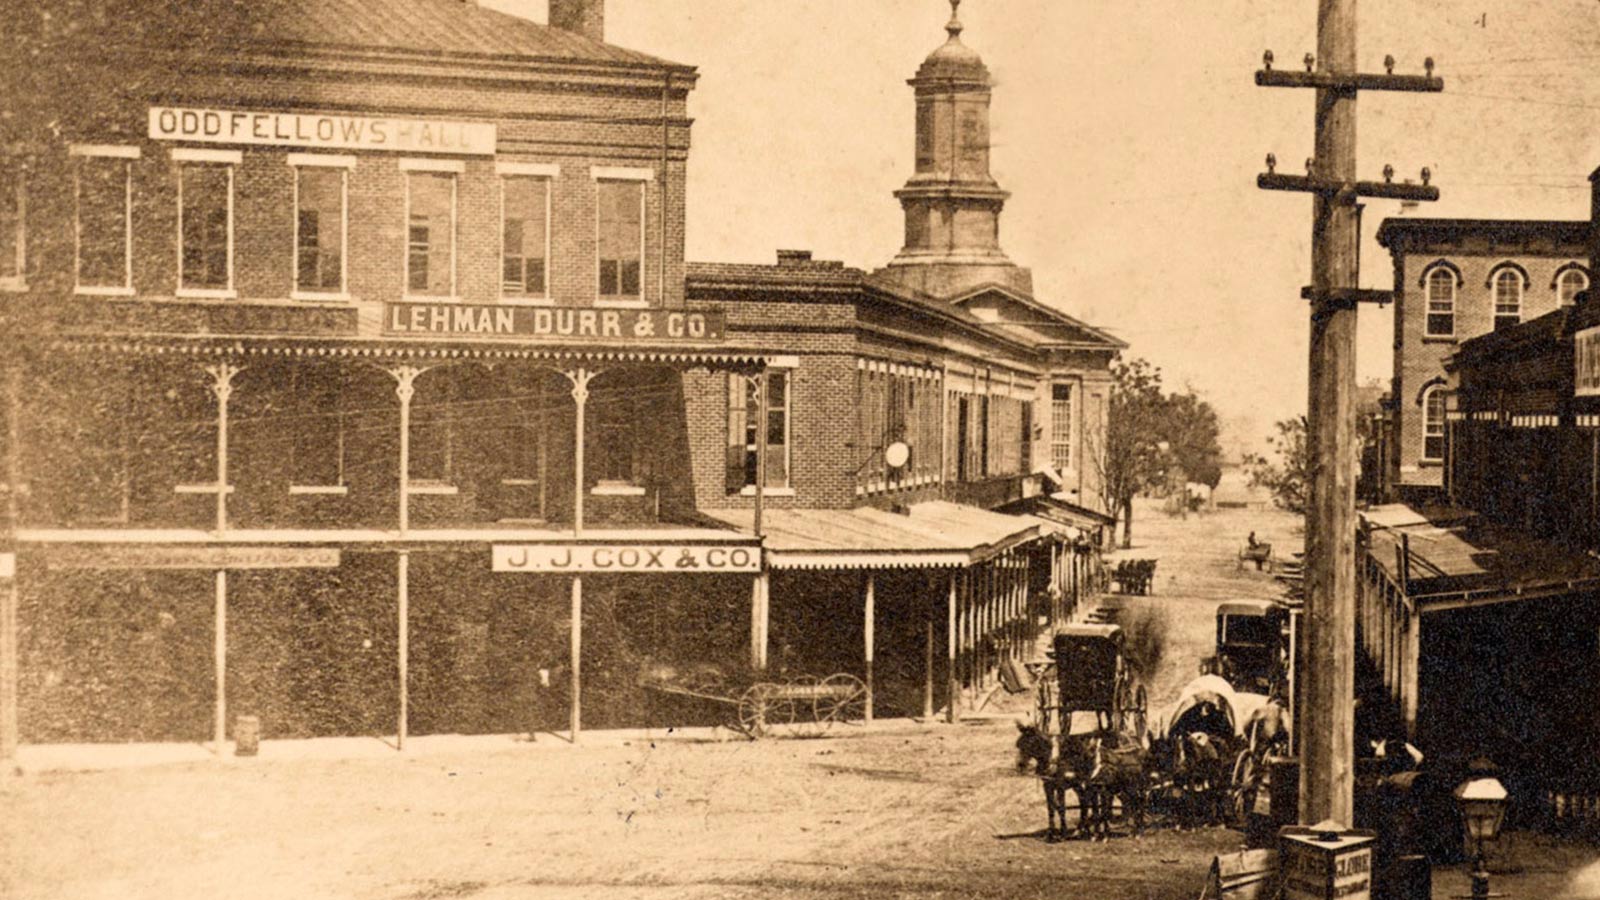 The Lehman Durr & Co. offices in Montgomery, Alabama, 1874 